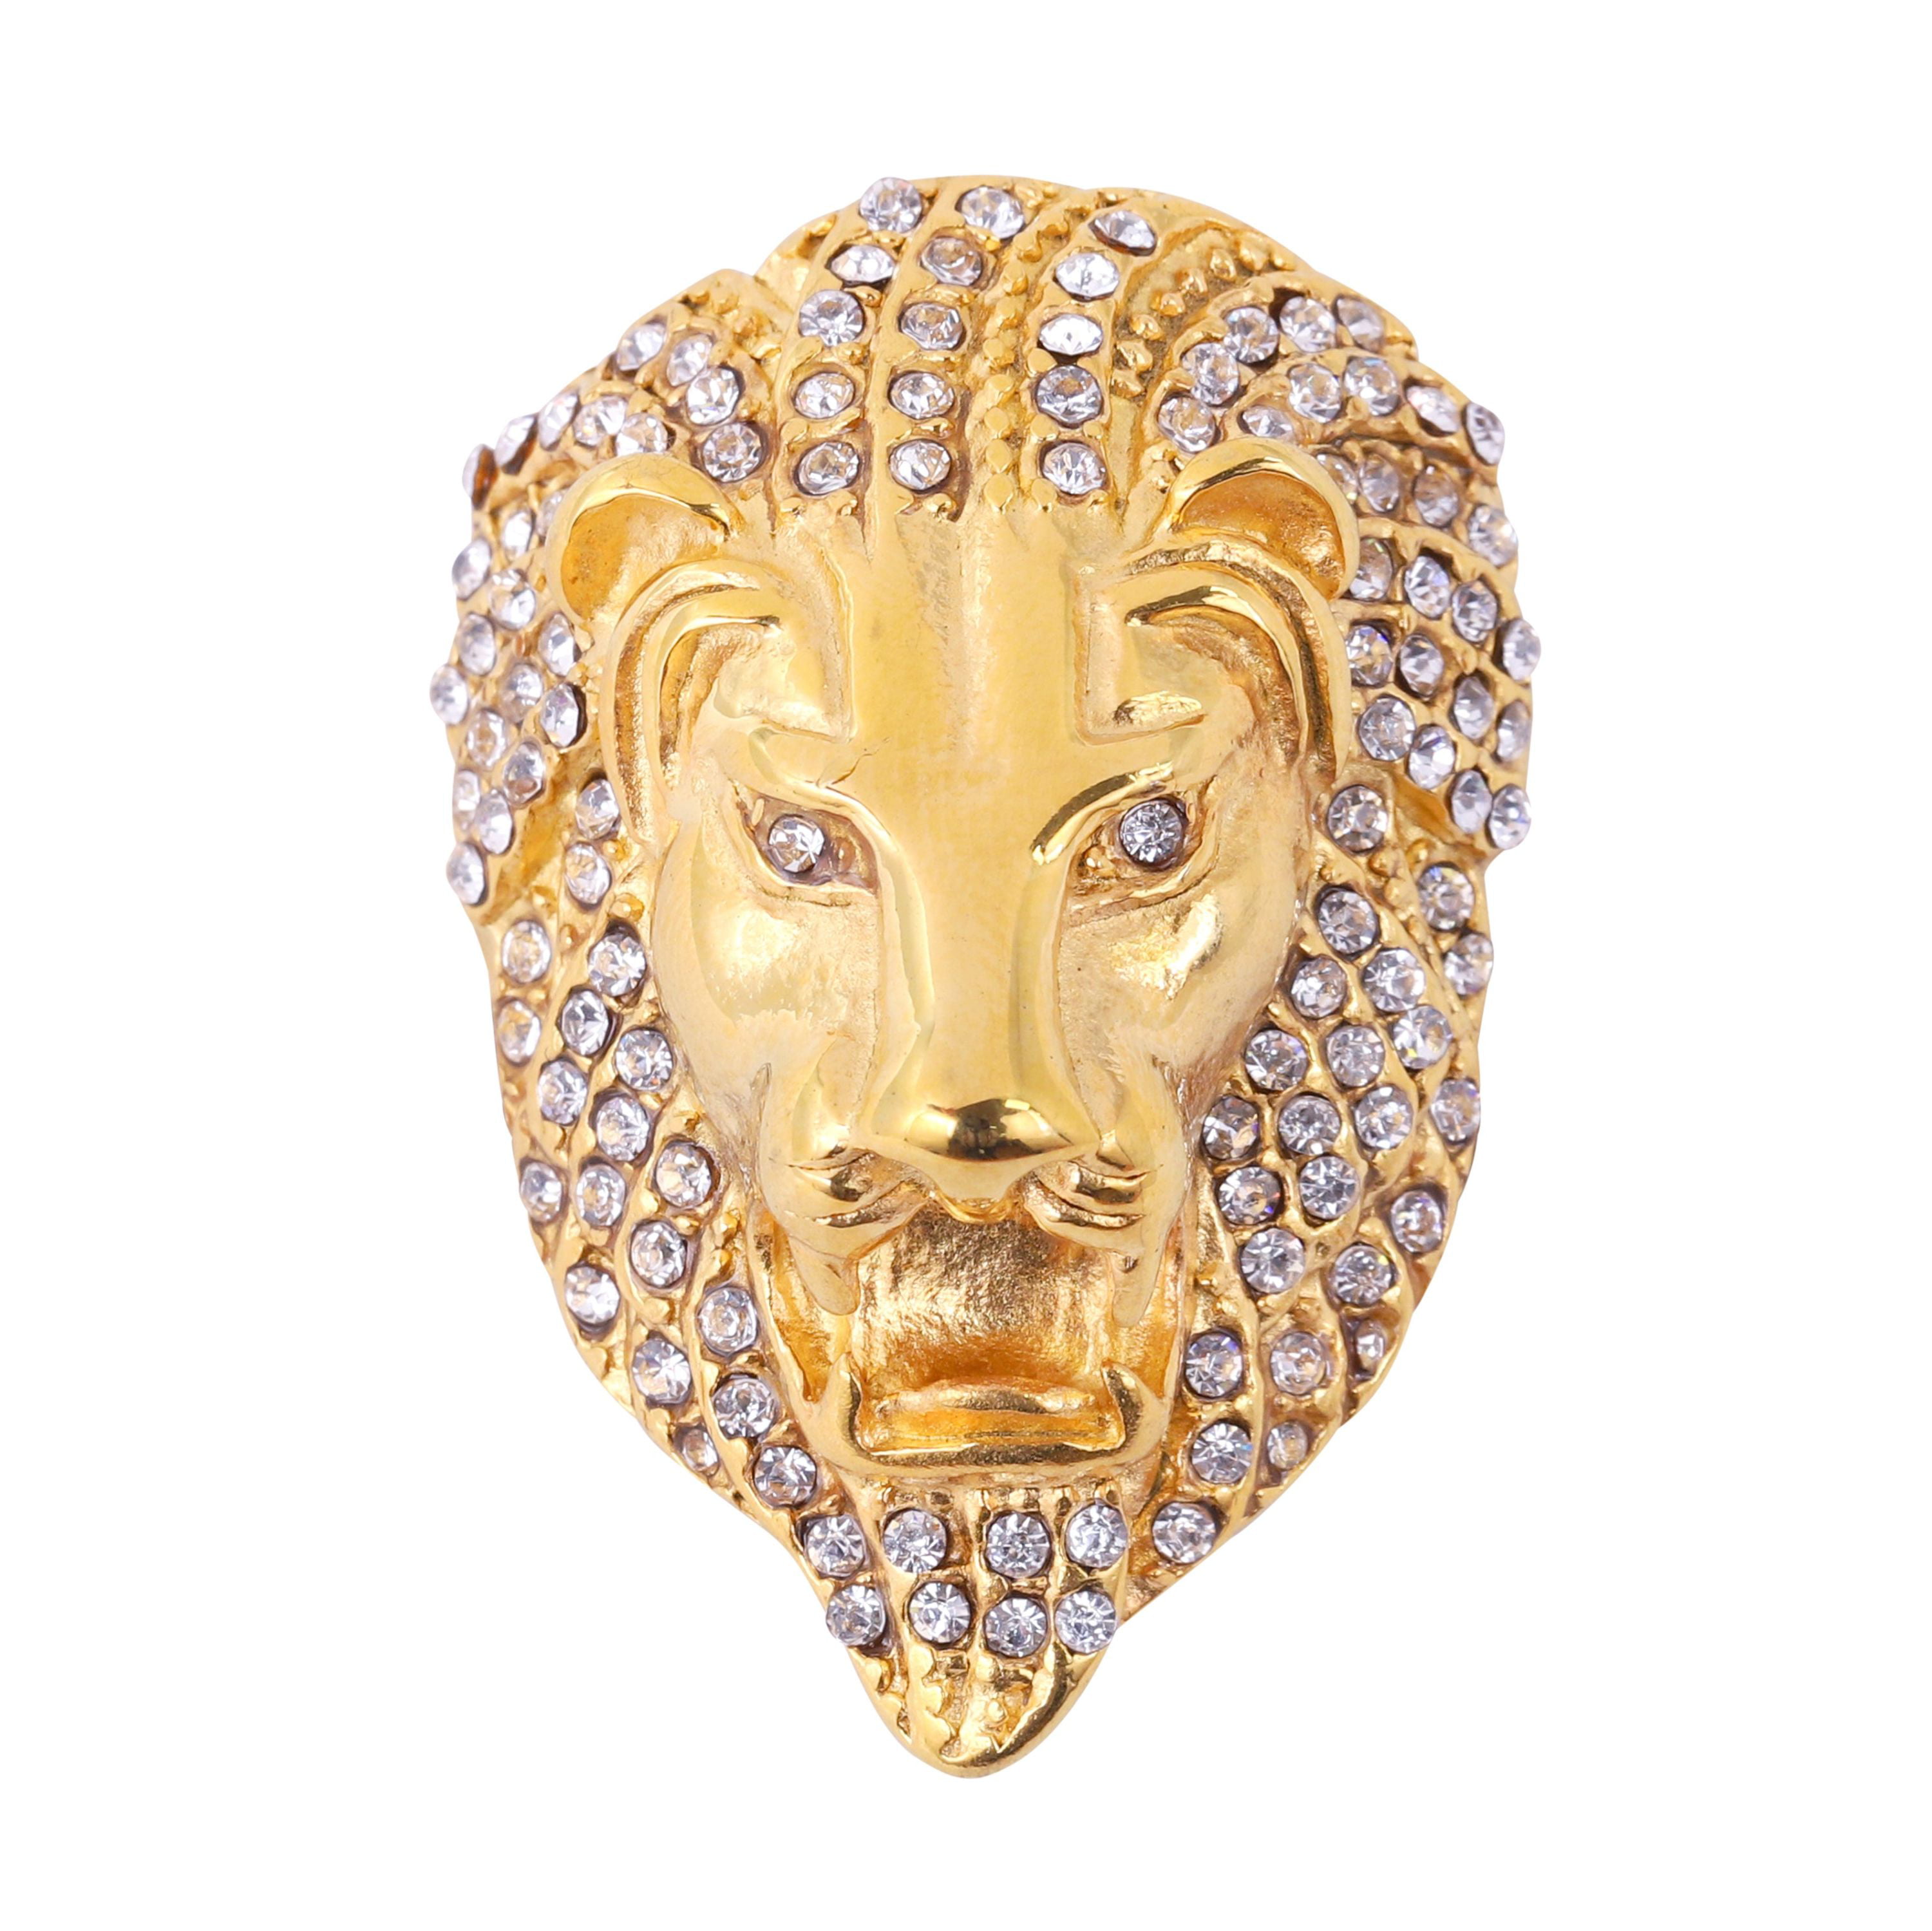 Men's Lion Rings 18k Yellow Gold Filled Stainless Steel Jewelry Size8 9 10 11 12 